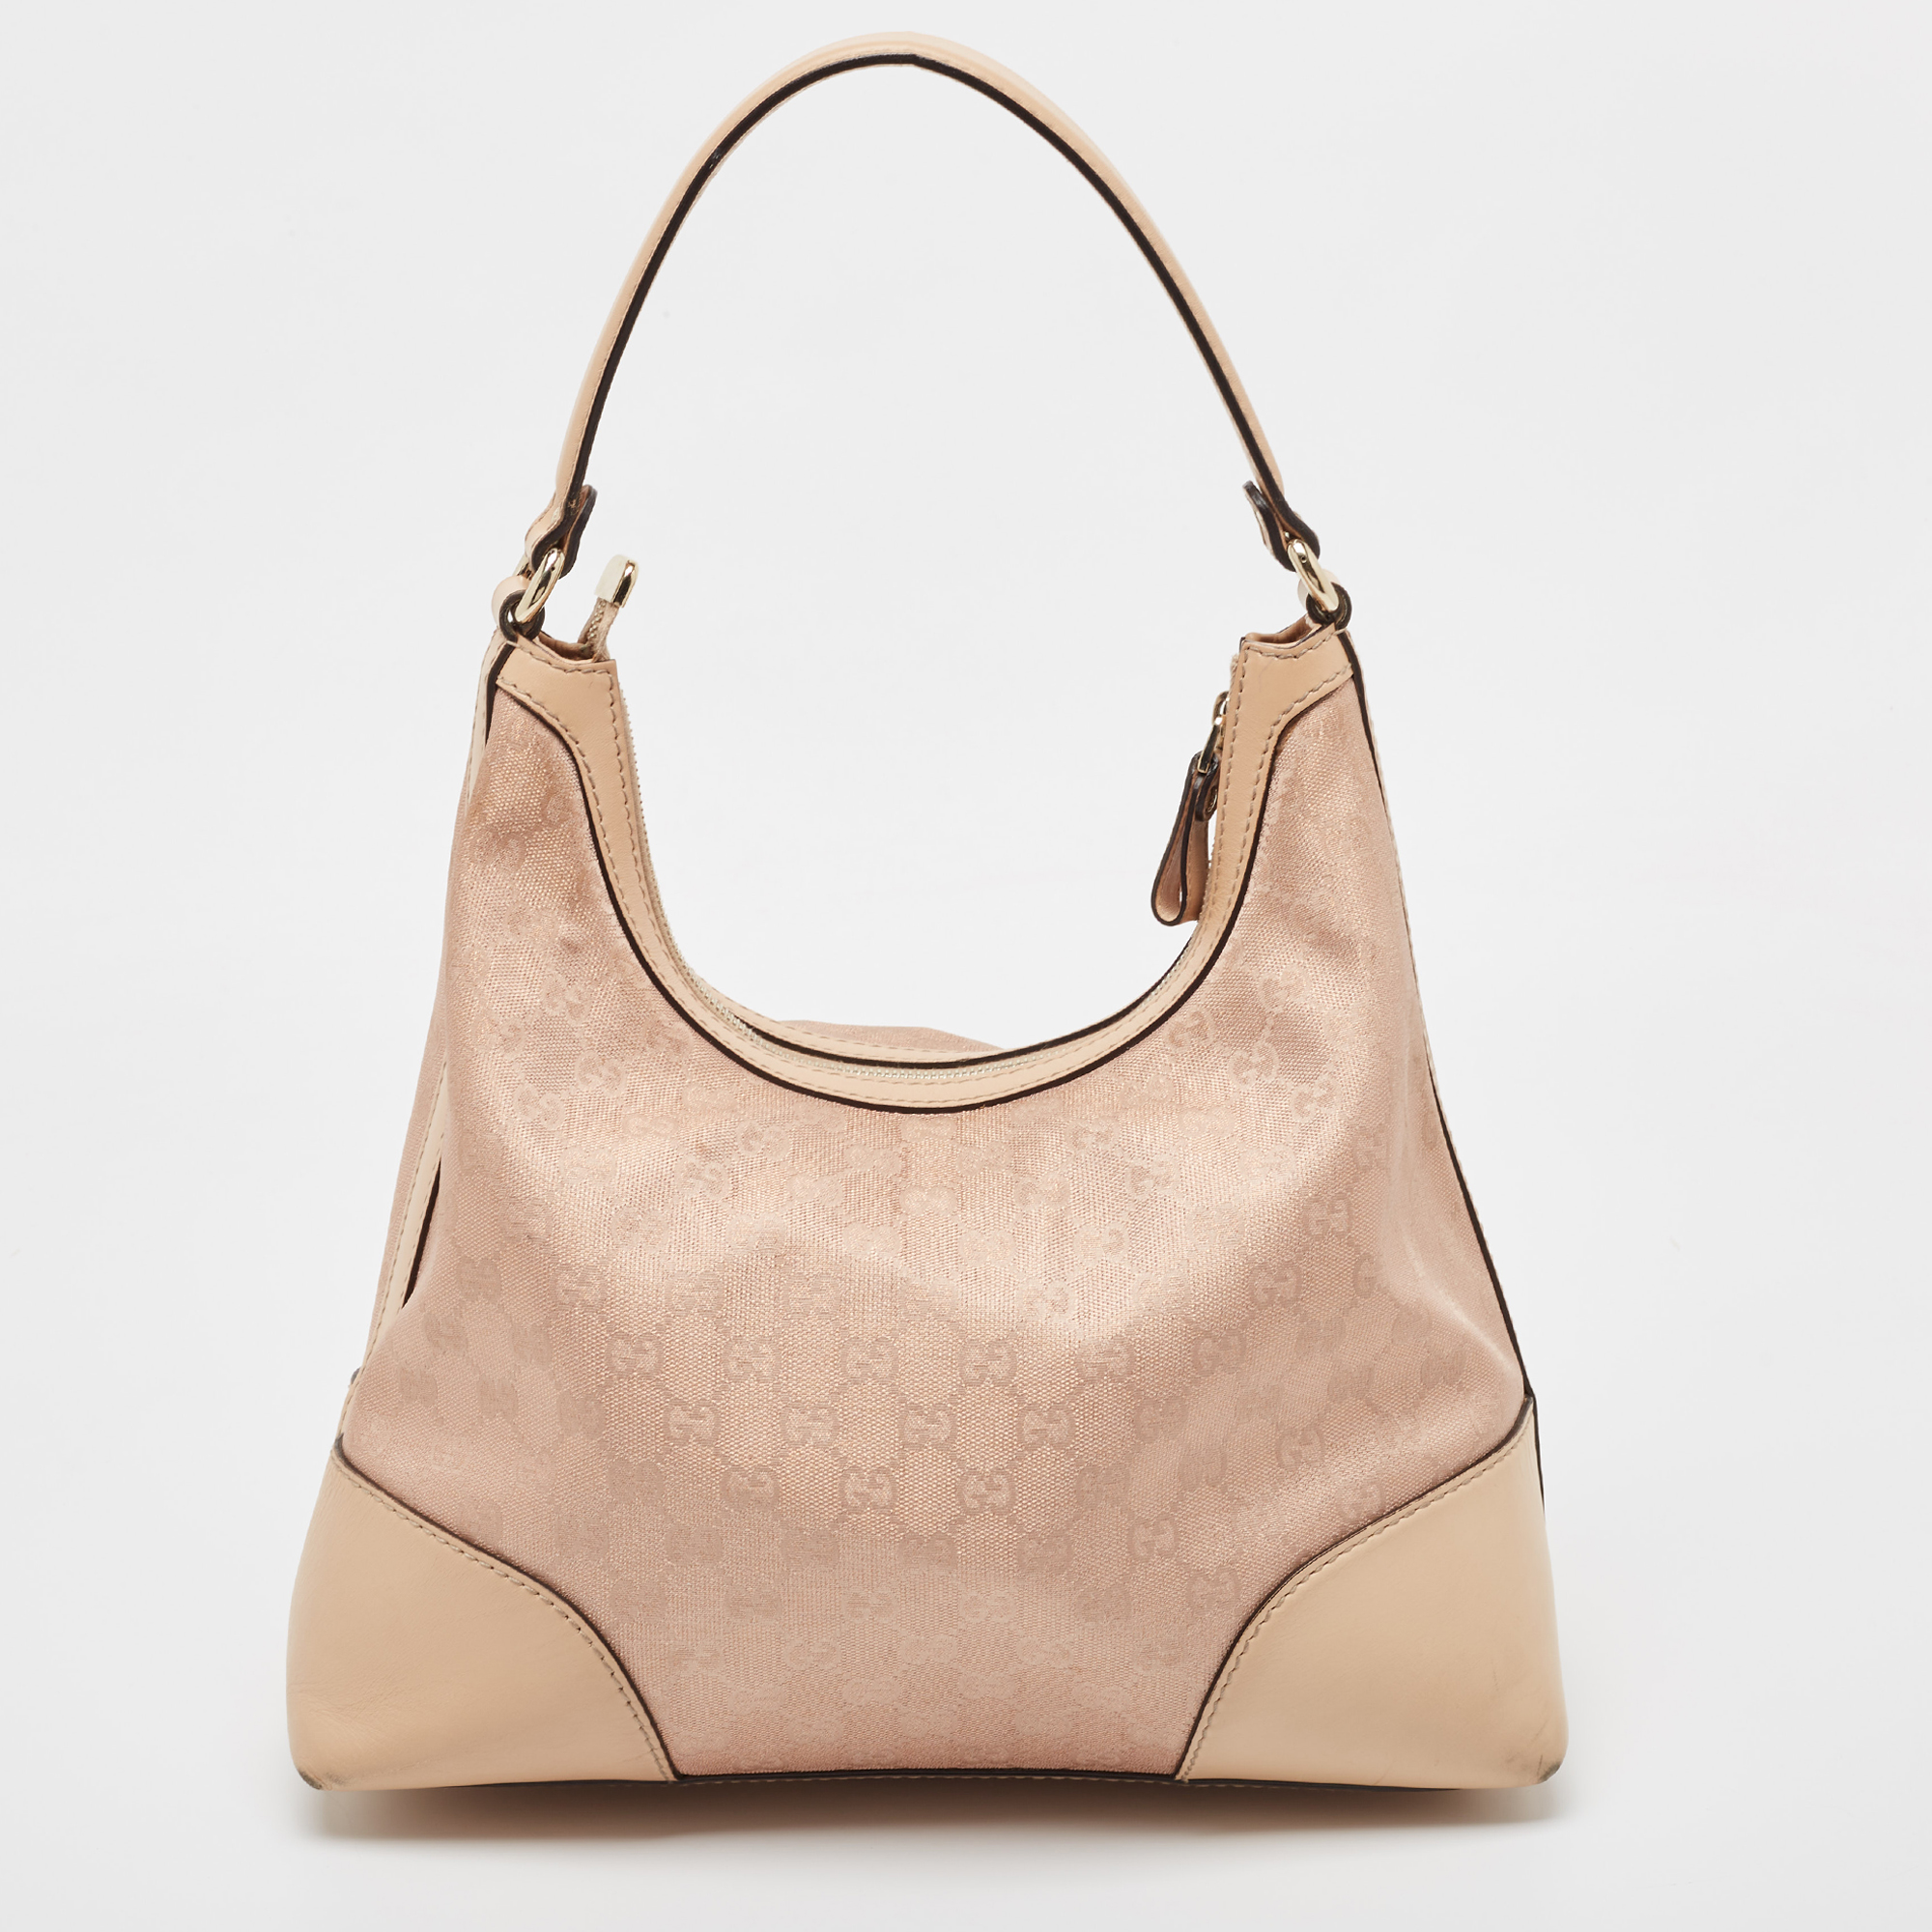 Gucci Beige/Metallic Pink GG Canvas And Leather Medium Lovely Hobo